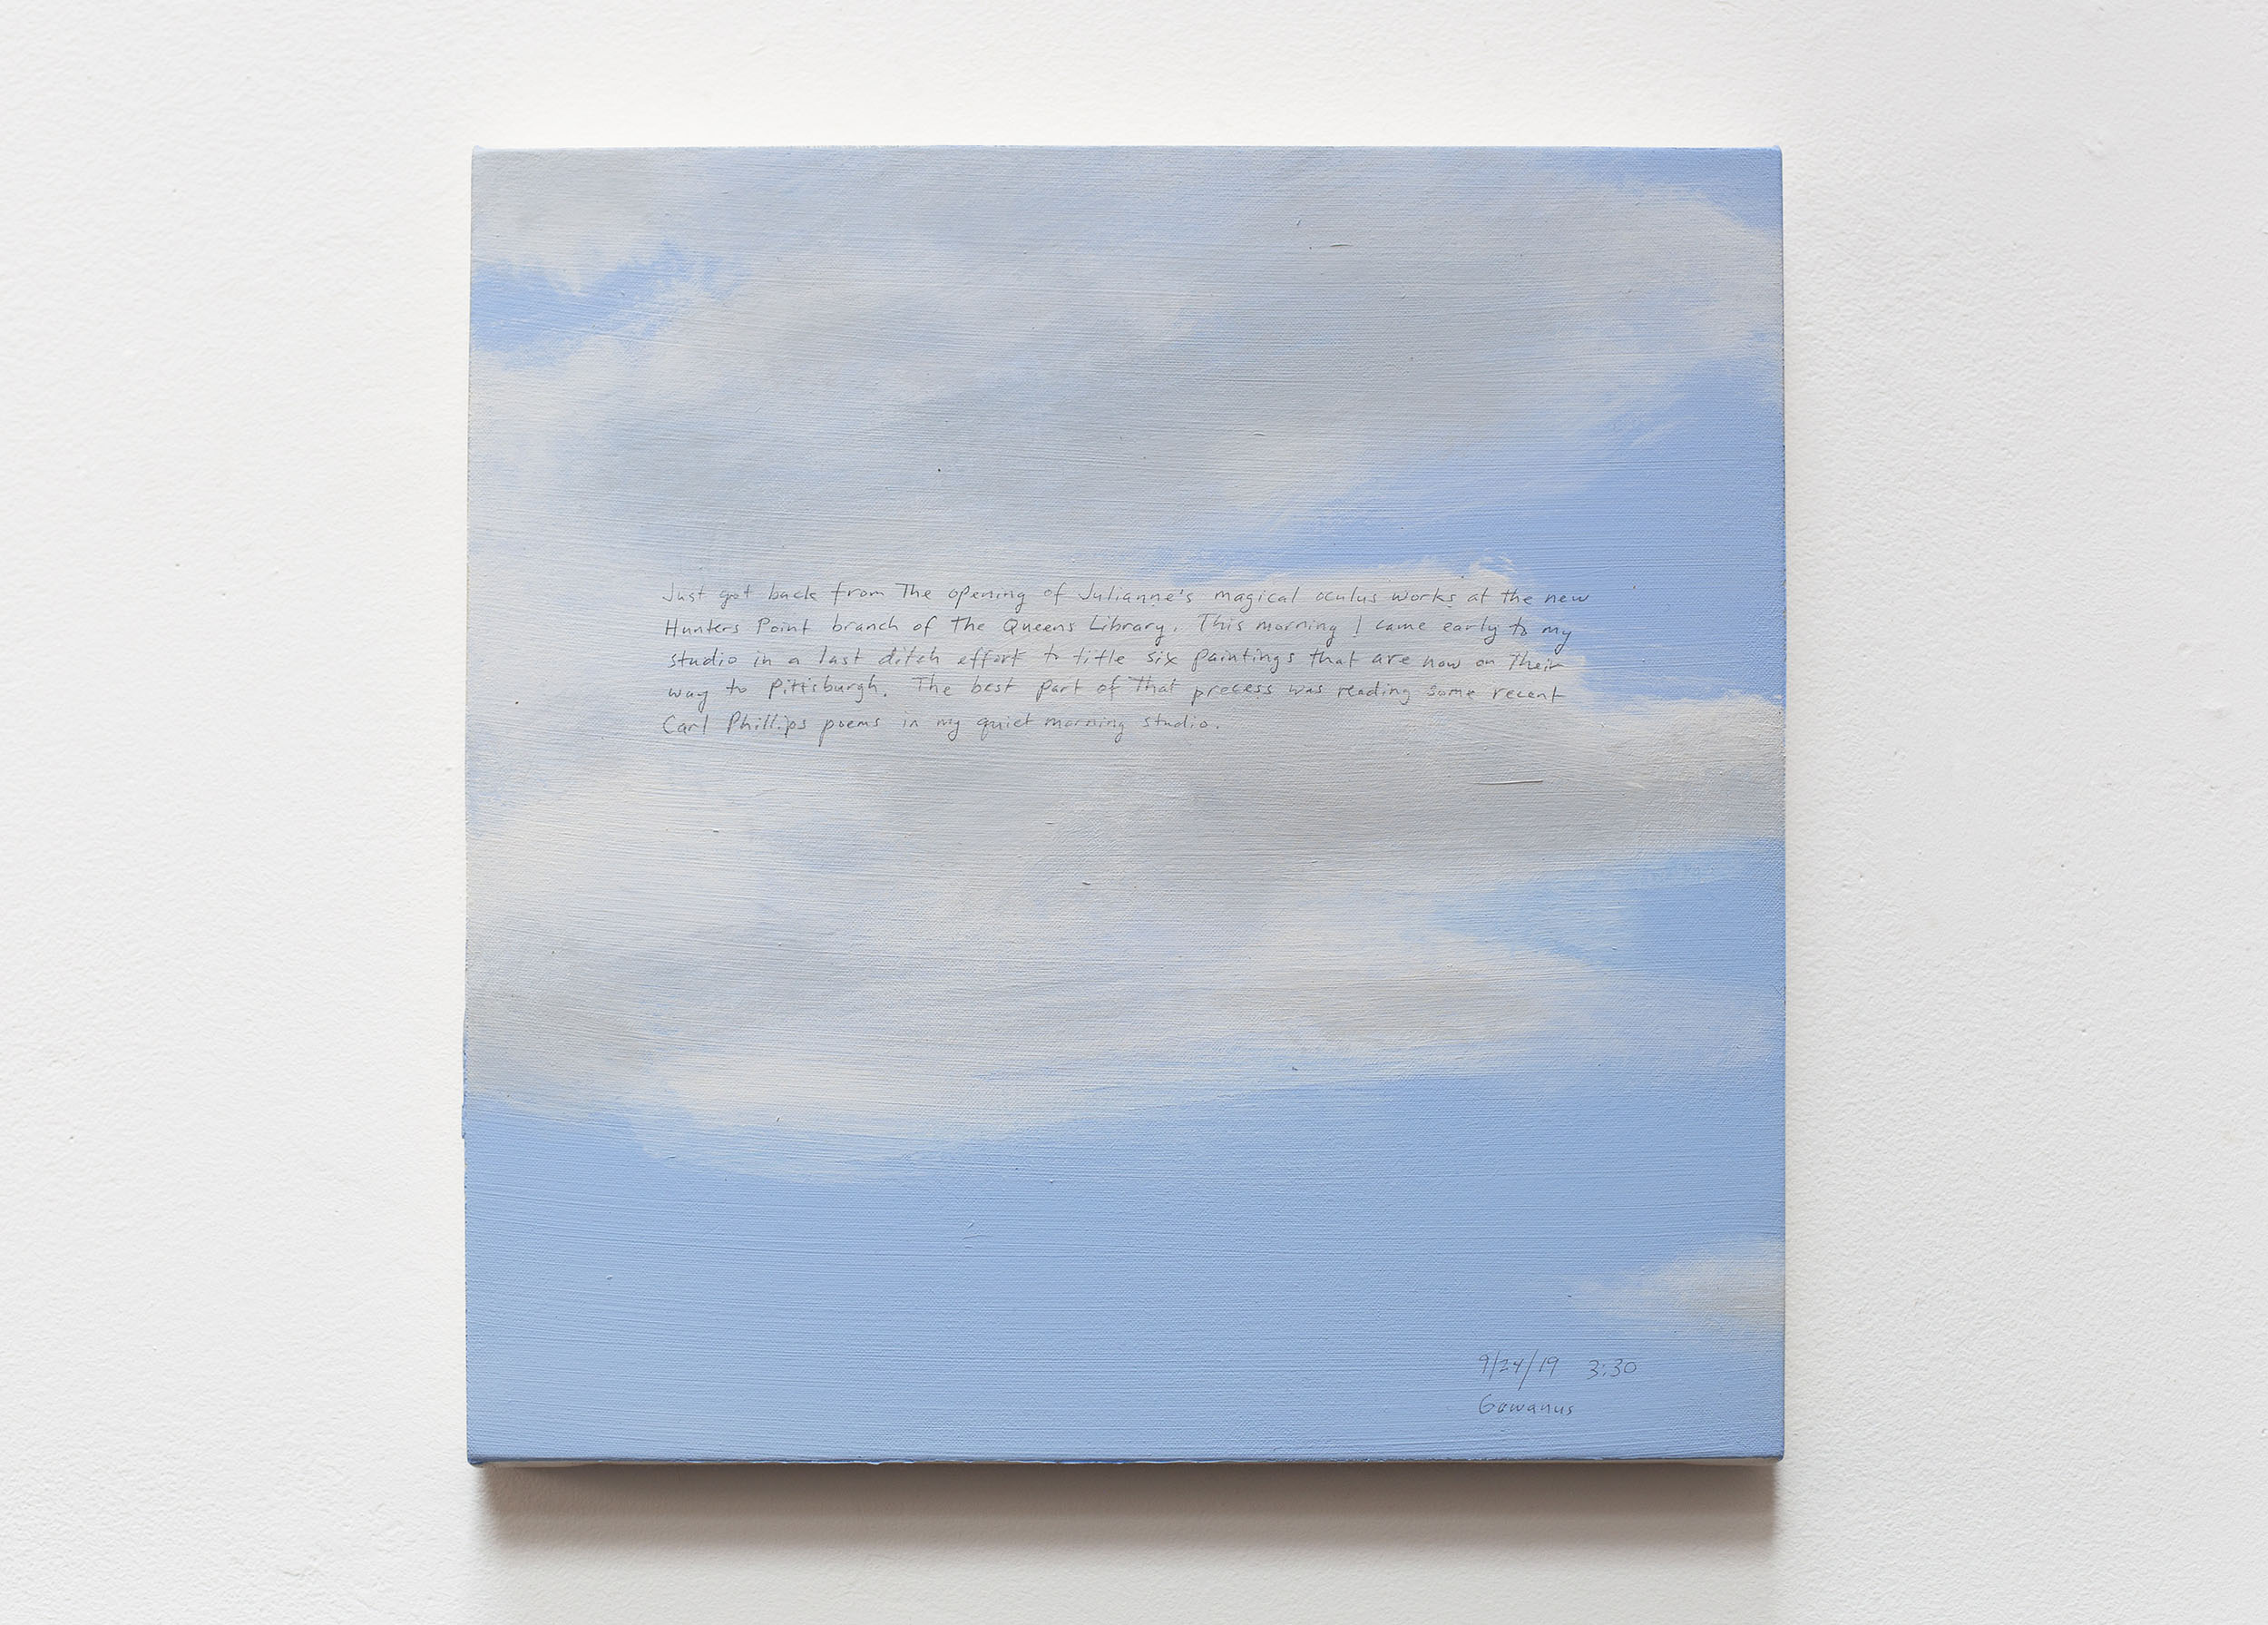 A 14 × 14 inch, acrylic painting of the sky. A journal entry is handwritten on the painting:

“Just got back from the opening of Julianne’s magical oculus works at the new Hunters Point branch of the Queens Library. This morning I came early to my studio in a last ditch effort to title six paintings that are now on their way to Pittsburgh. The best part of that process was reading some recent Carl Phillips poems in my quiet morning studio.

9/24/19 3:30 pm
Gowanus”